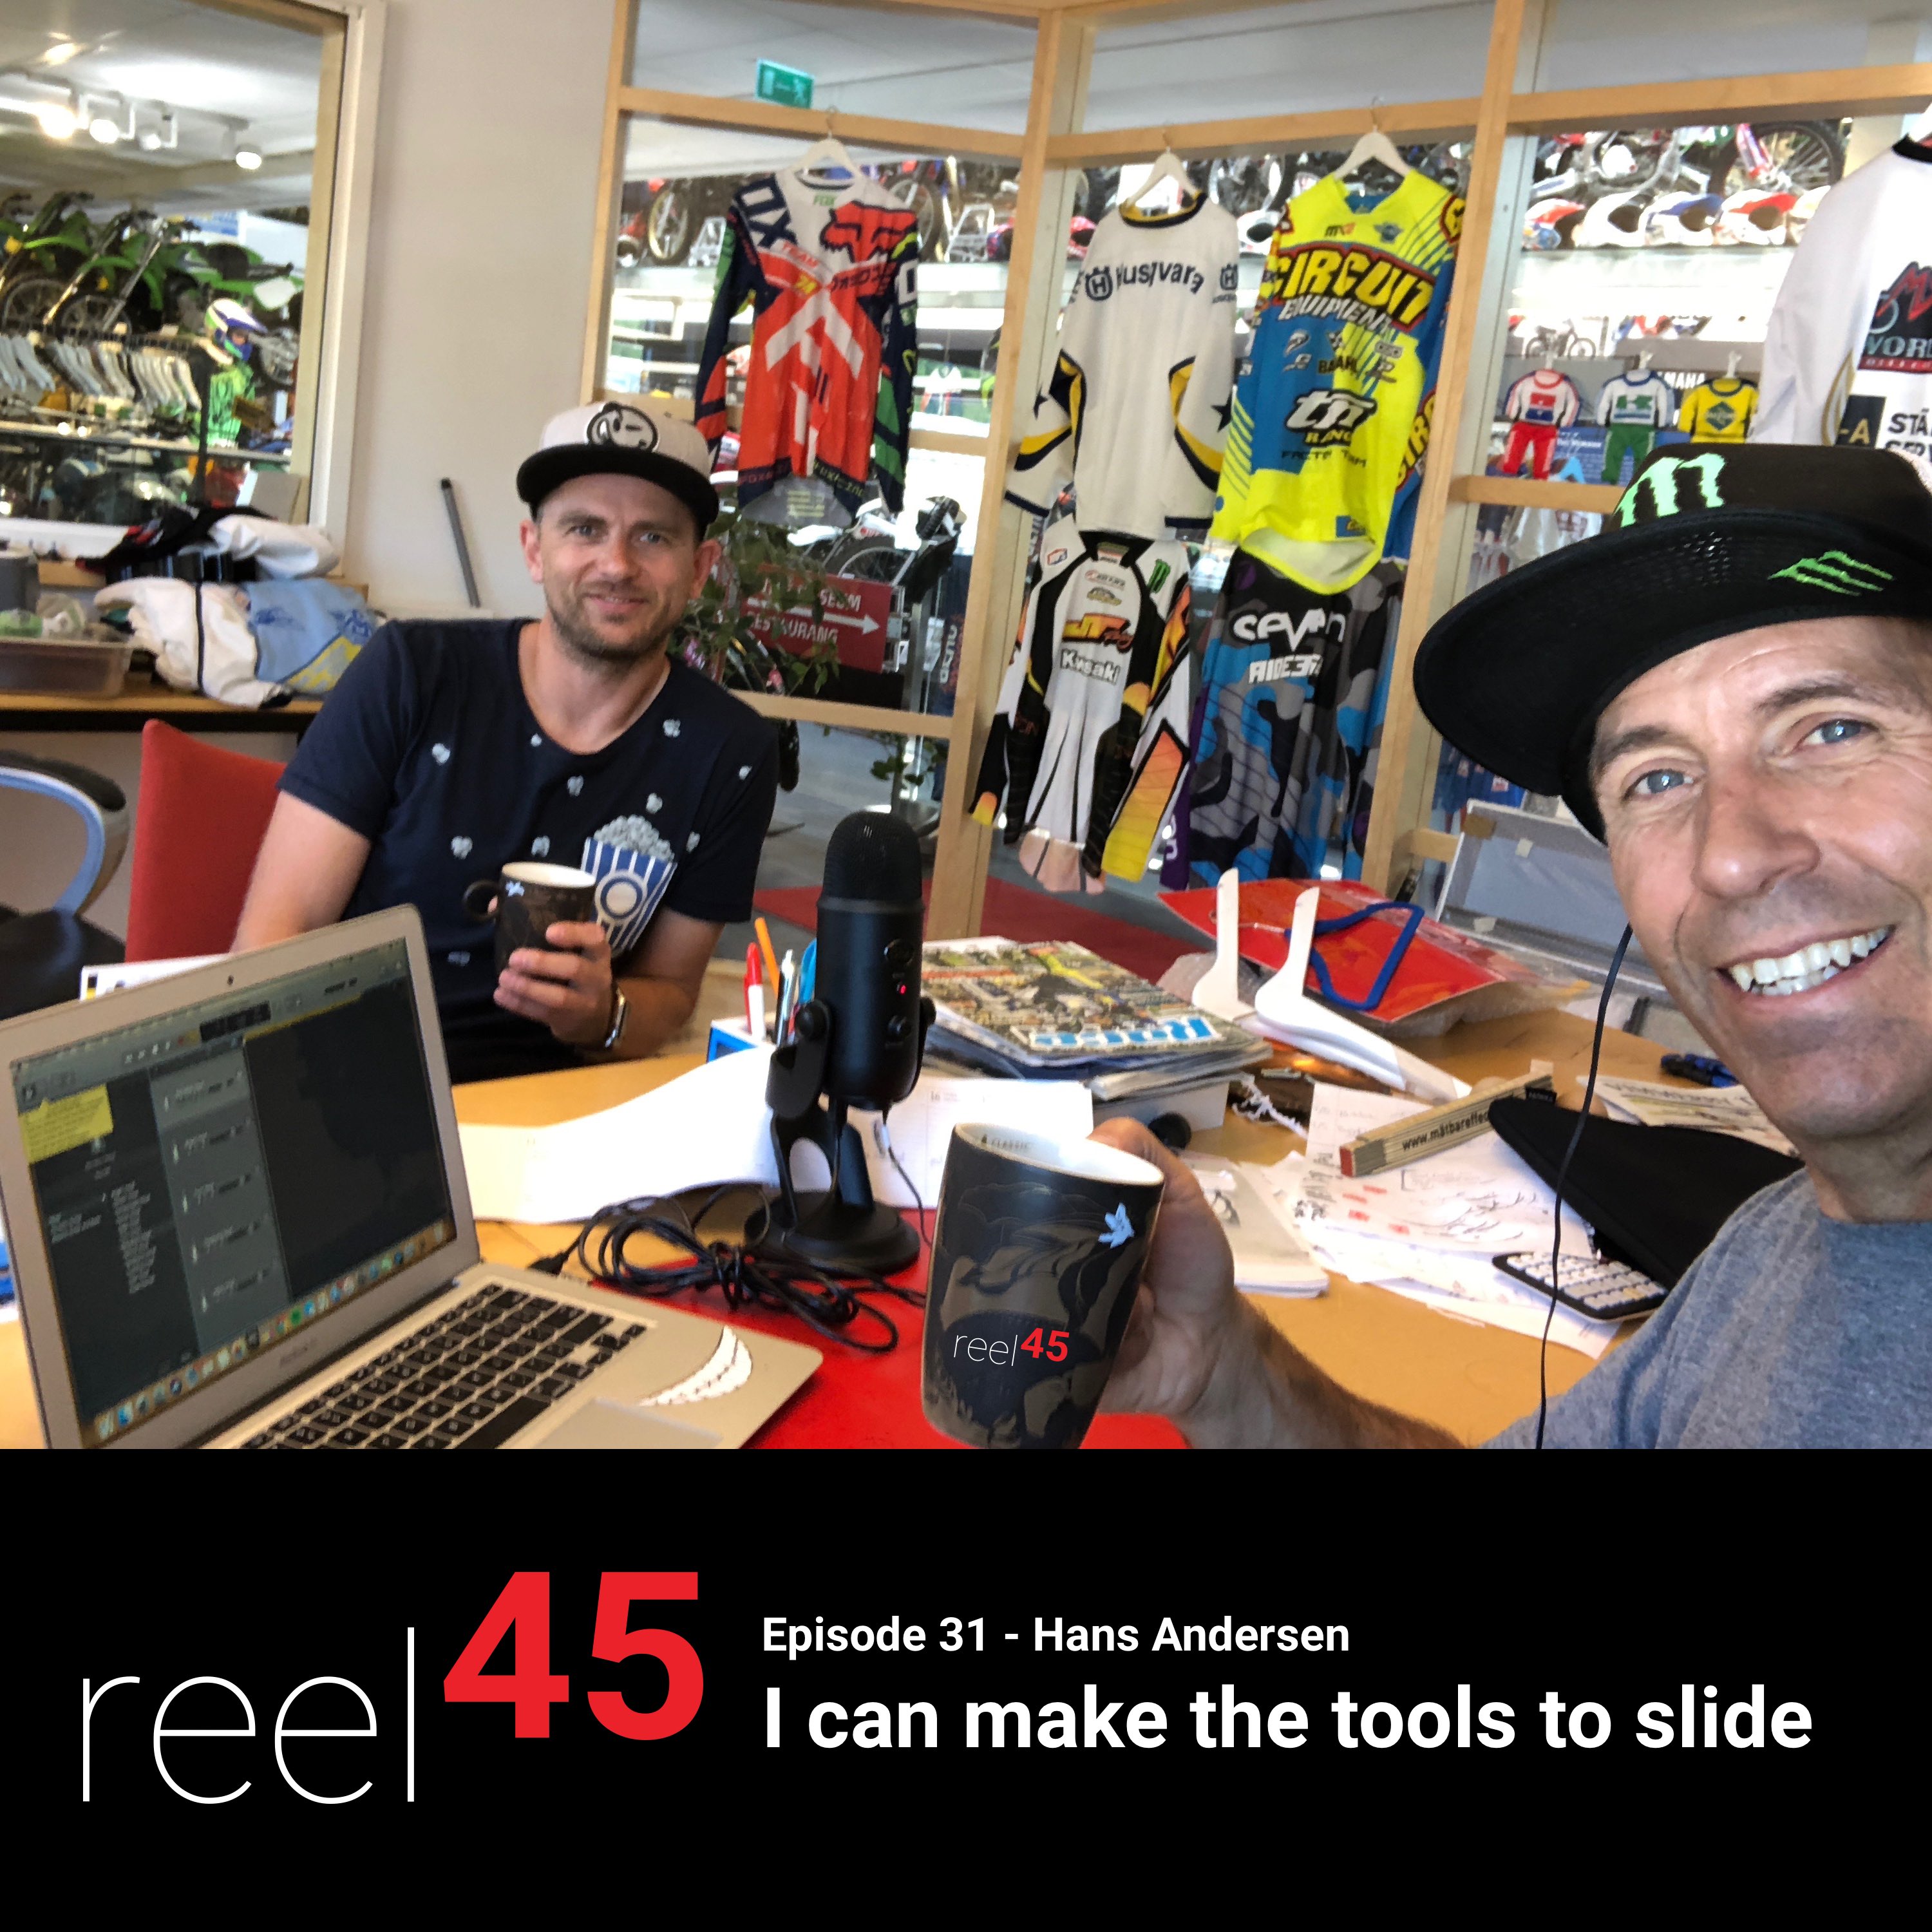 Episode 31- I can make the Tools to Slide! Hans Andersen